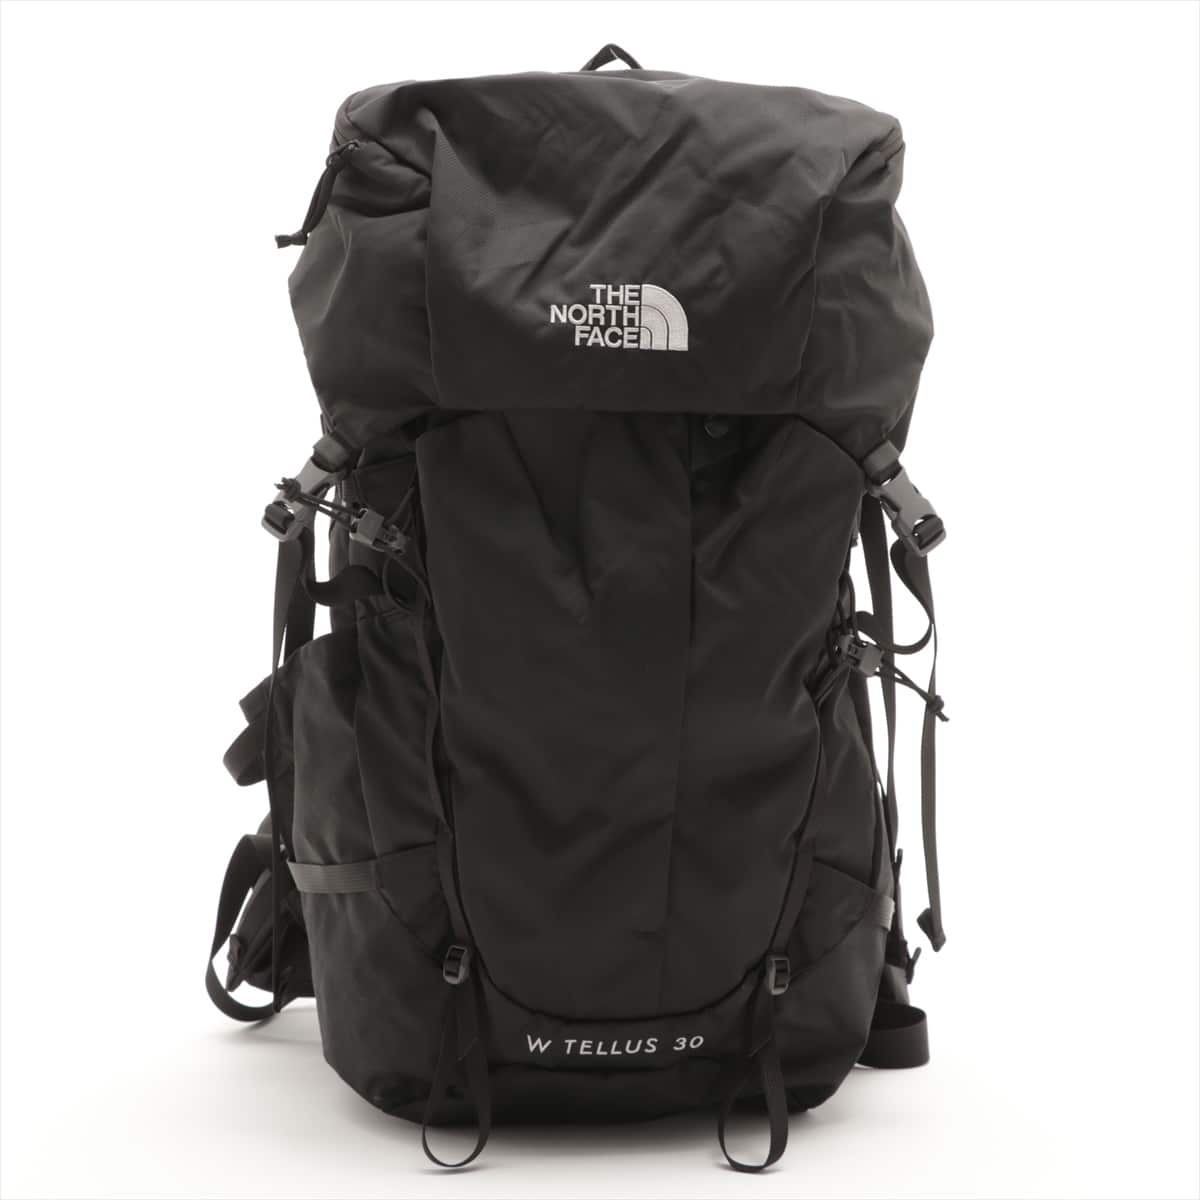 The North Face Nylon Backpack Black NMW61810 gloves with rain cover